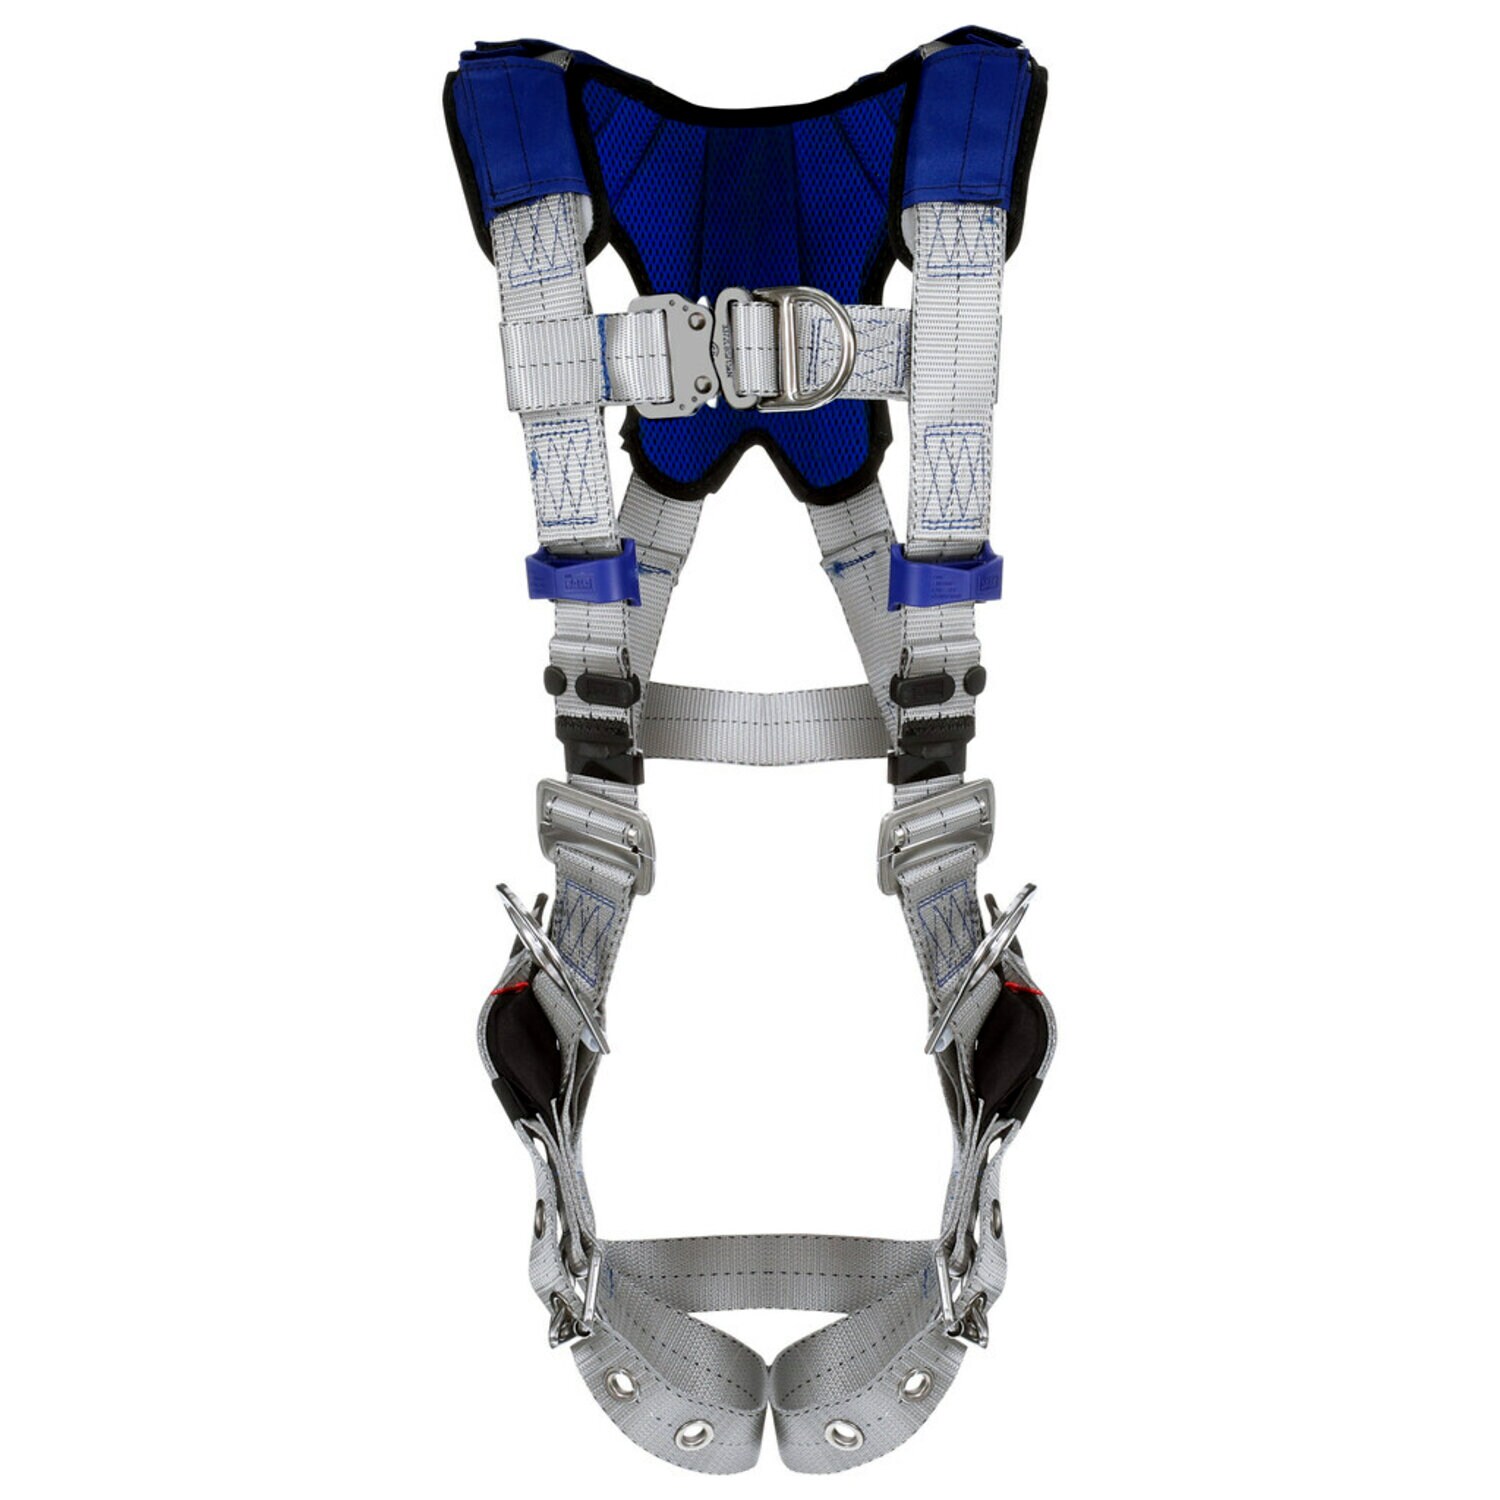 7012817698 - 3M DBI-SALA ExoFit X100 Comfort Climbing/Positioning Safety Harness 1401217, Large, Stainless Steel Hardware